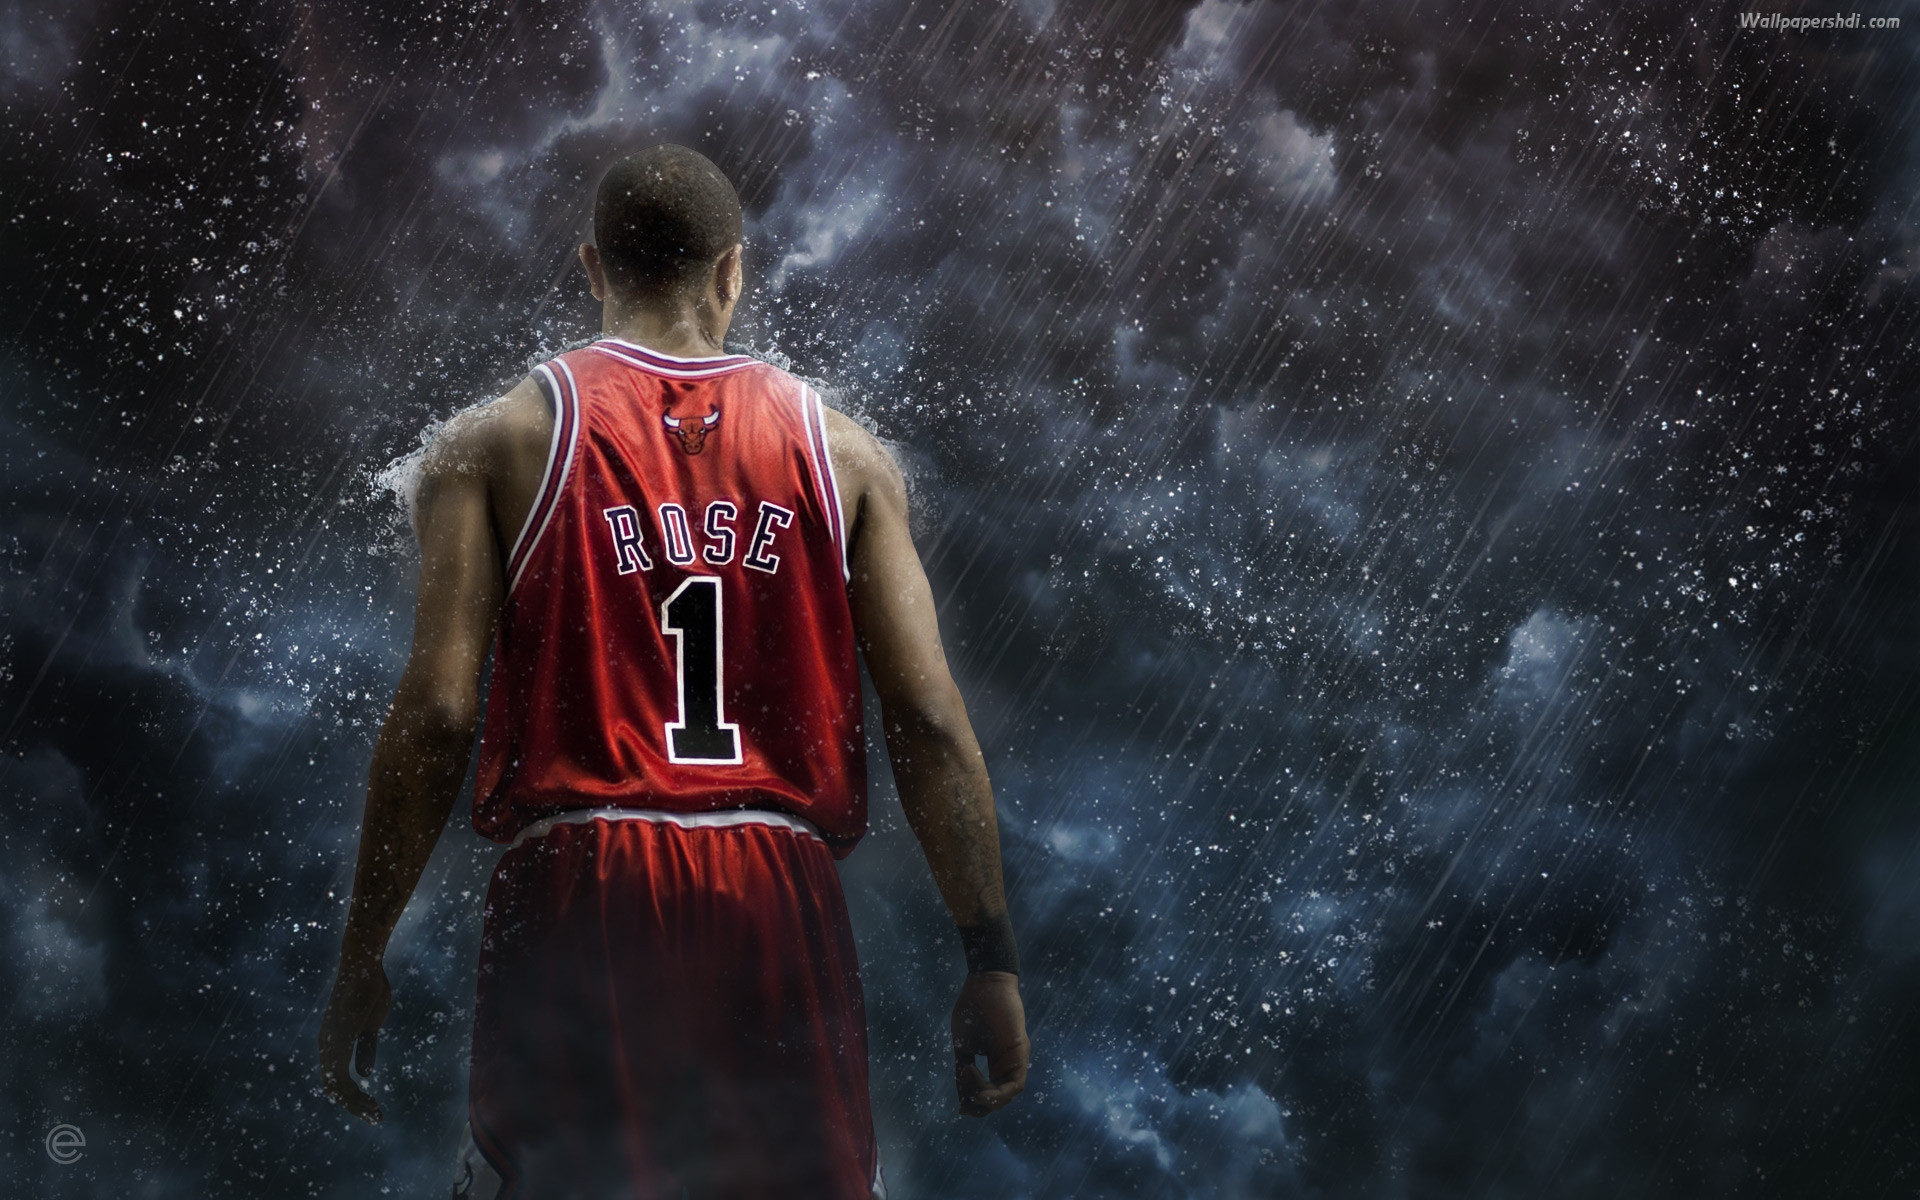 Derrick Rose Wallpapers High Resolution and Quality Download 1920x1200